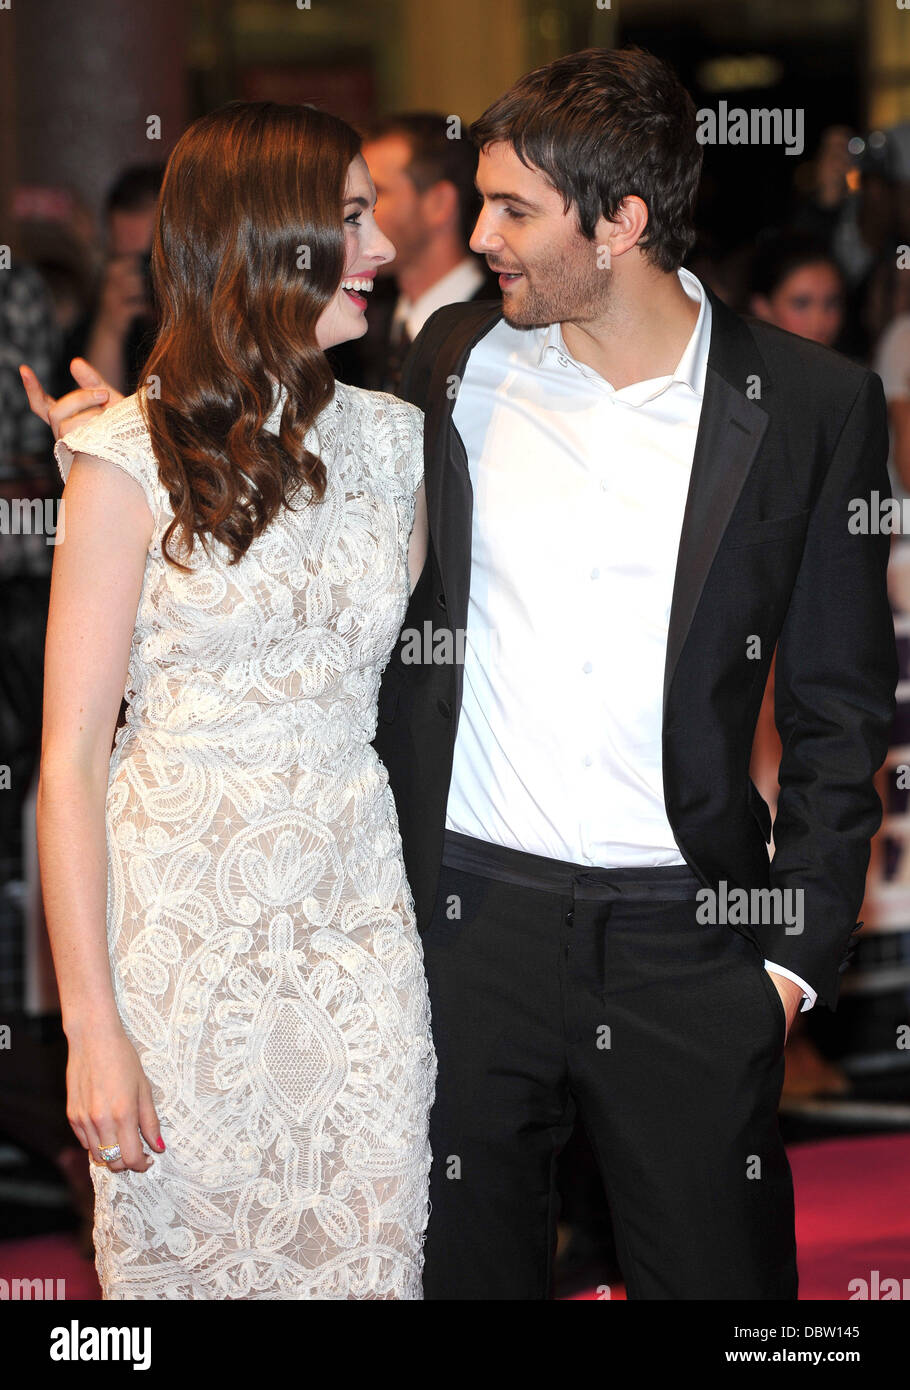 Anne Hathaway, Jim Sturgess One Day - UK film premiere held at the Vue  Westfield - Arrivals. London, England - 23.08.11 Stock Photo - Alamy